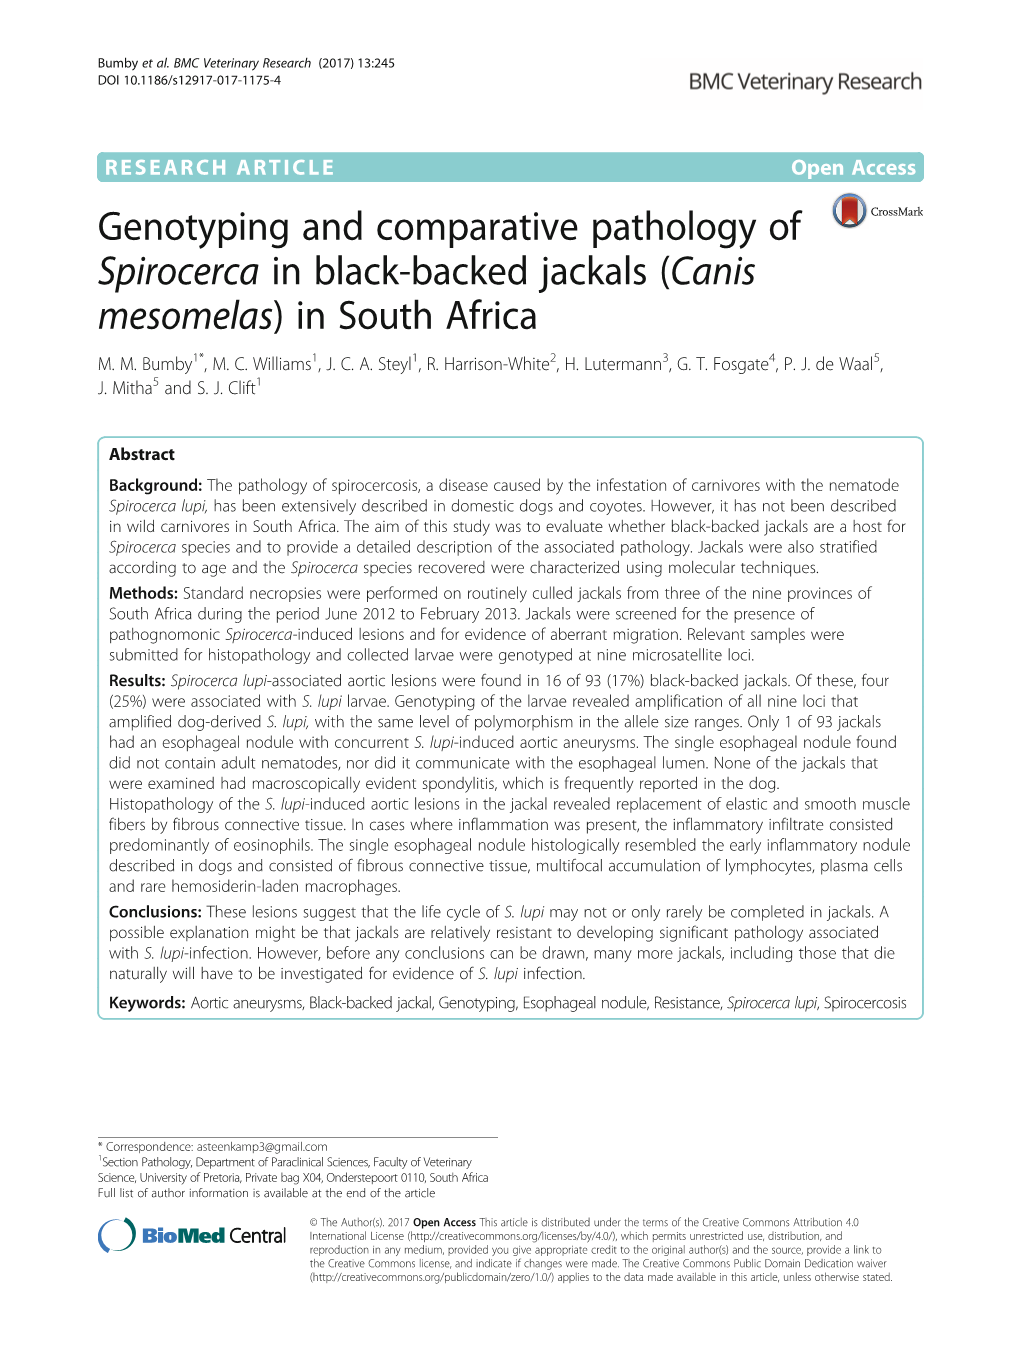 Genotyping and Comparative Pathology of Spirocerca in Black-Backed Jackals (Canis Mesomelas) in South Africa M